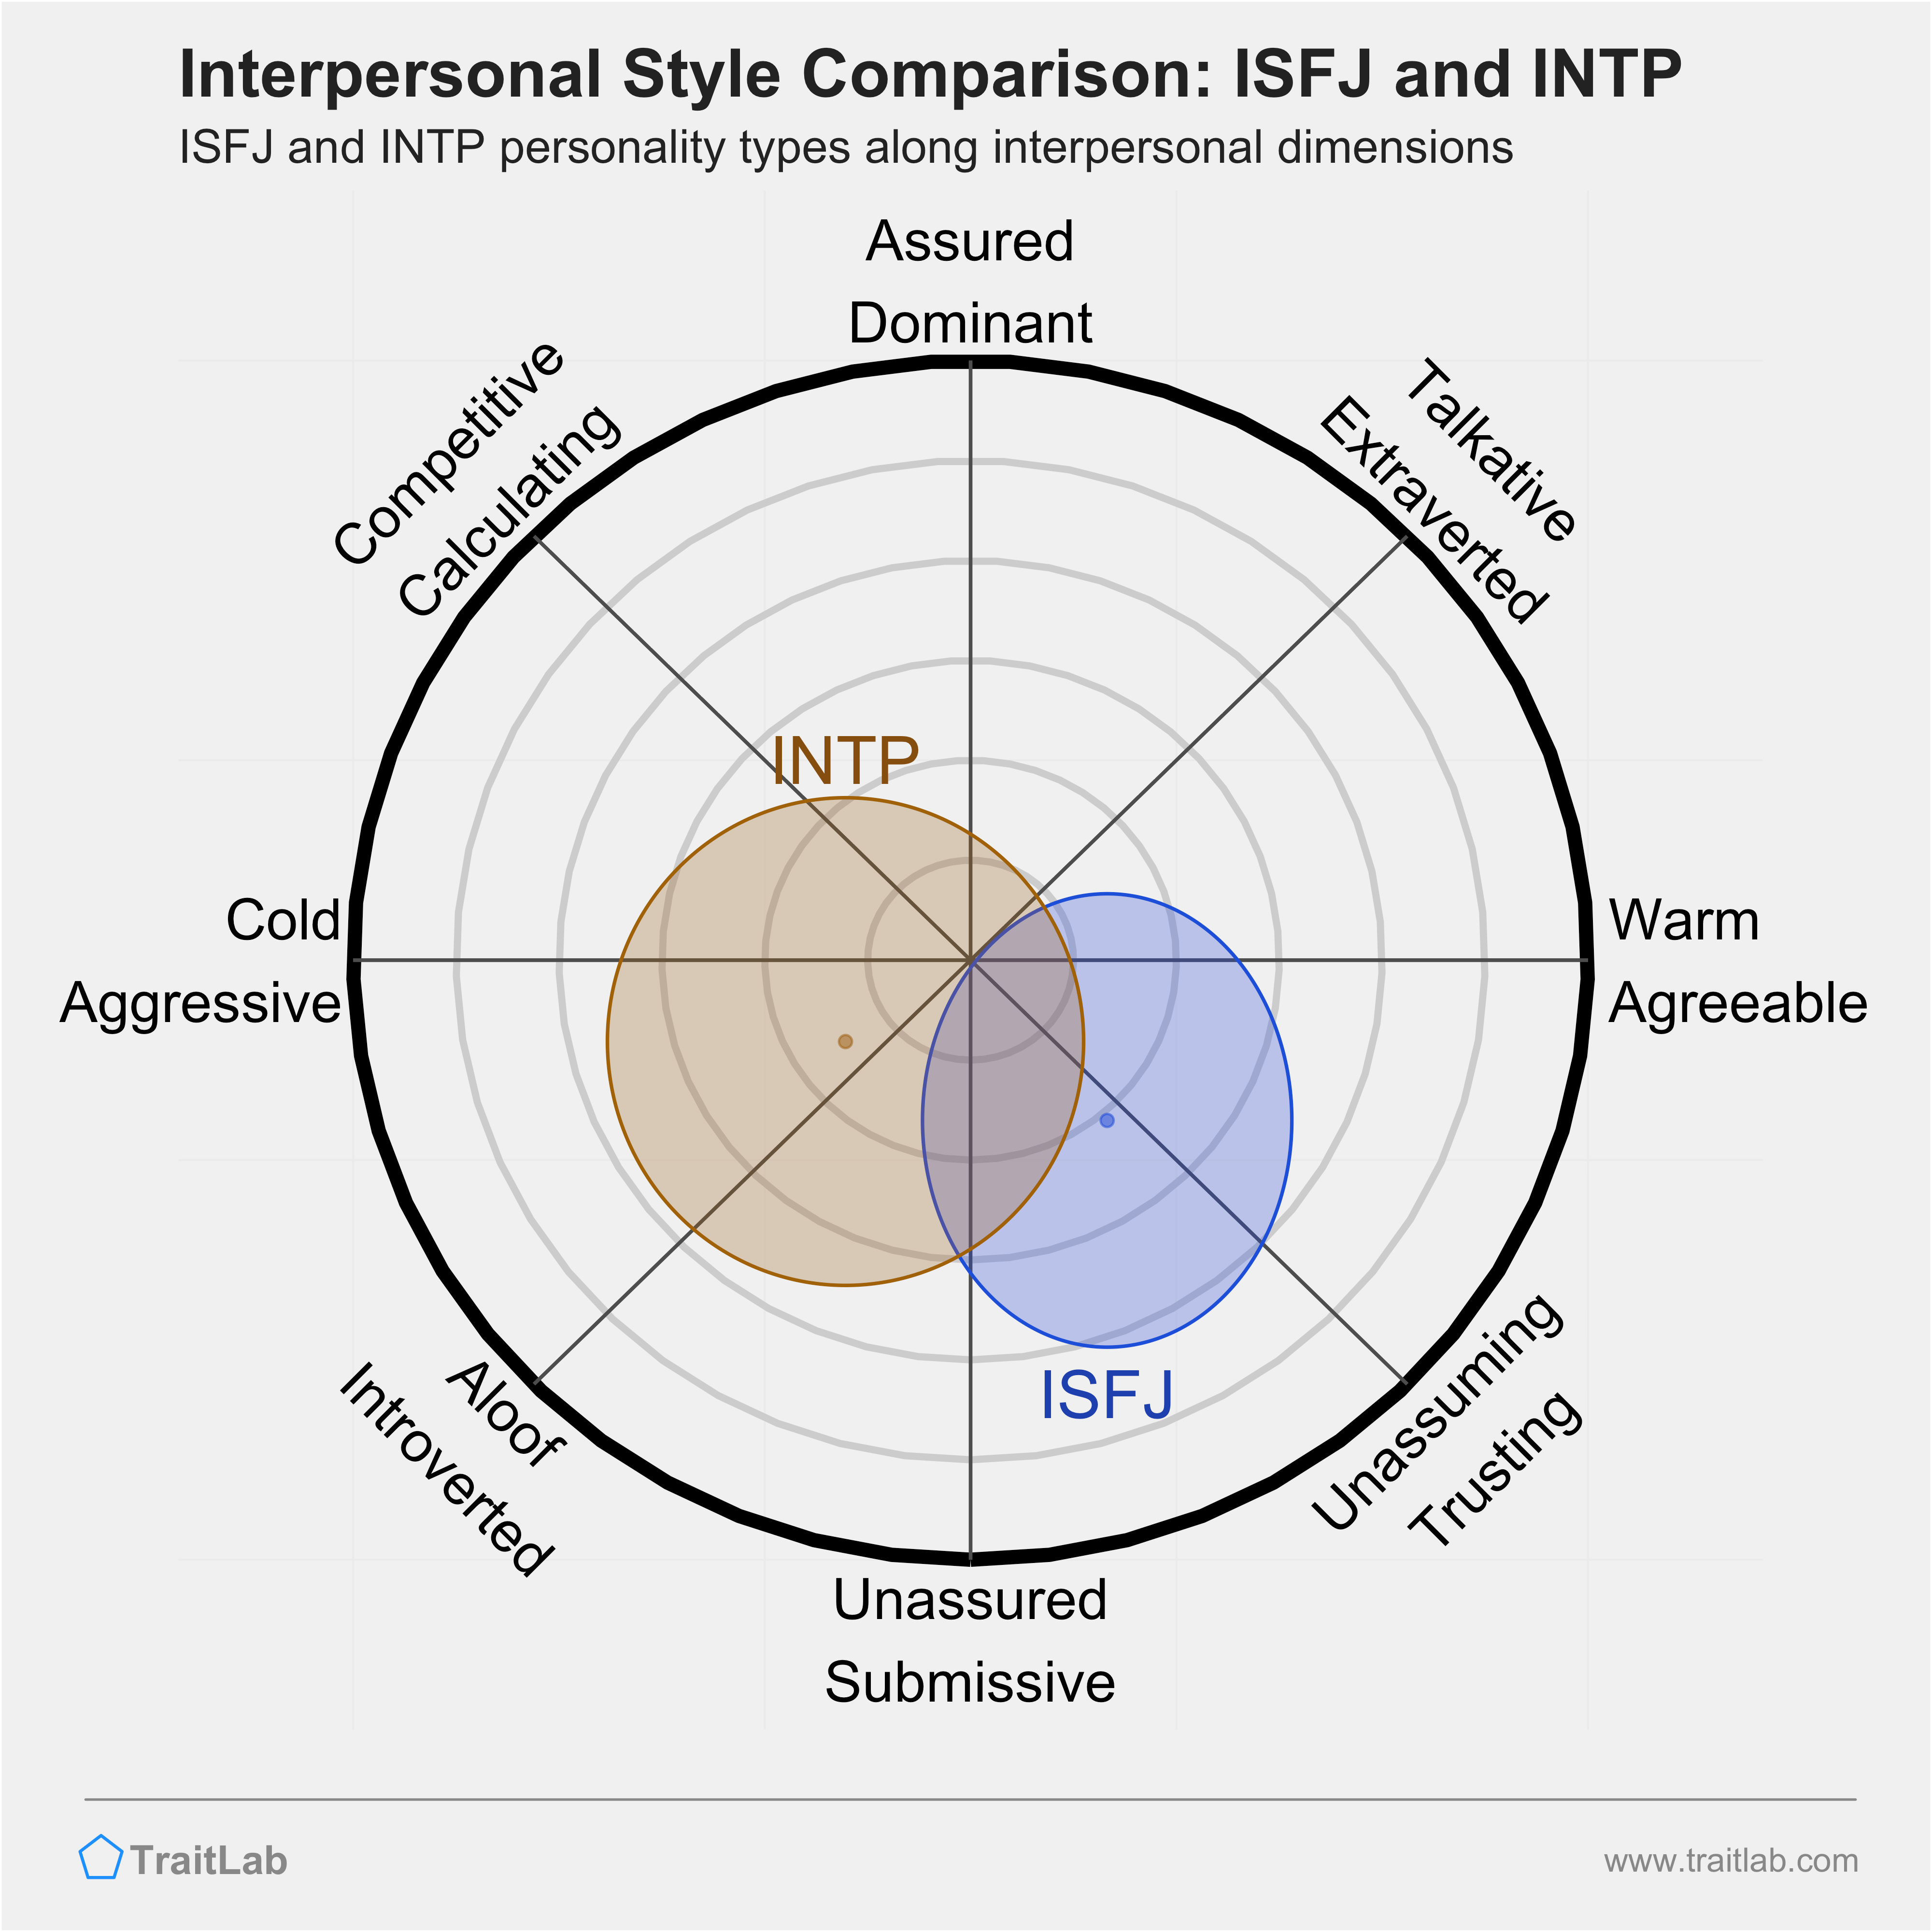 ISFJ and INTP comparison across interpersonal dimensions